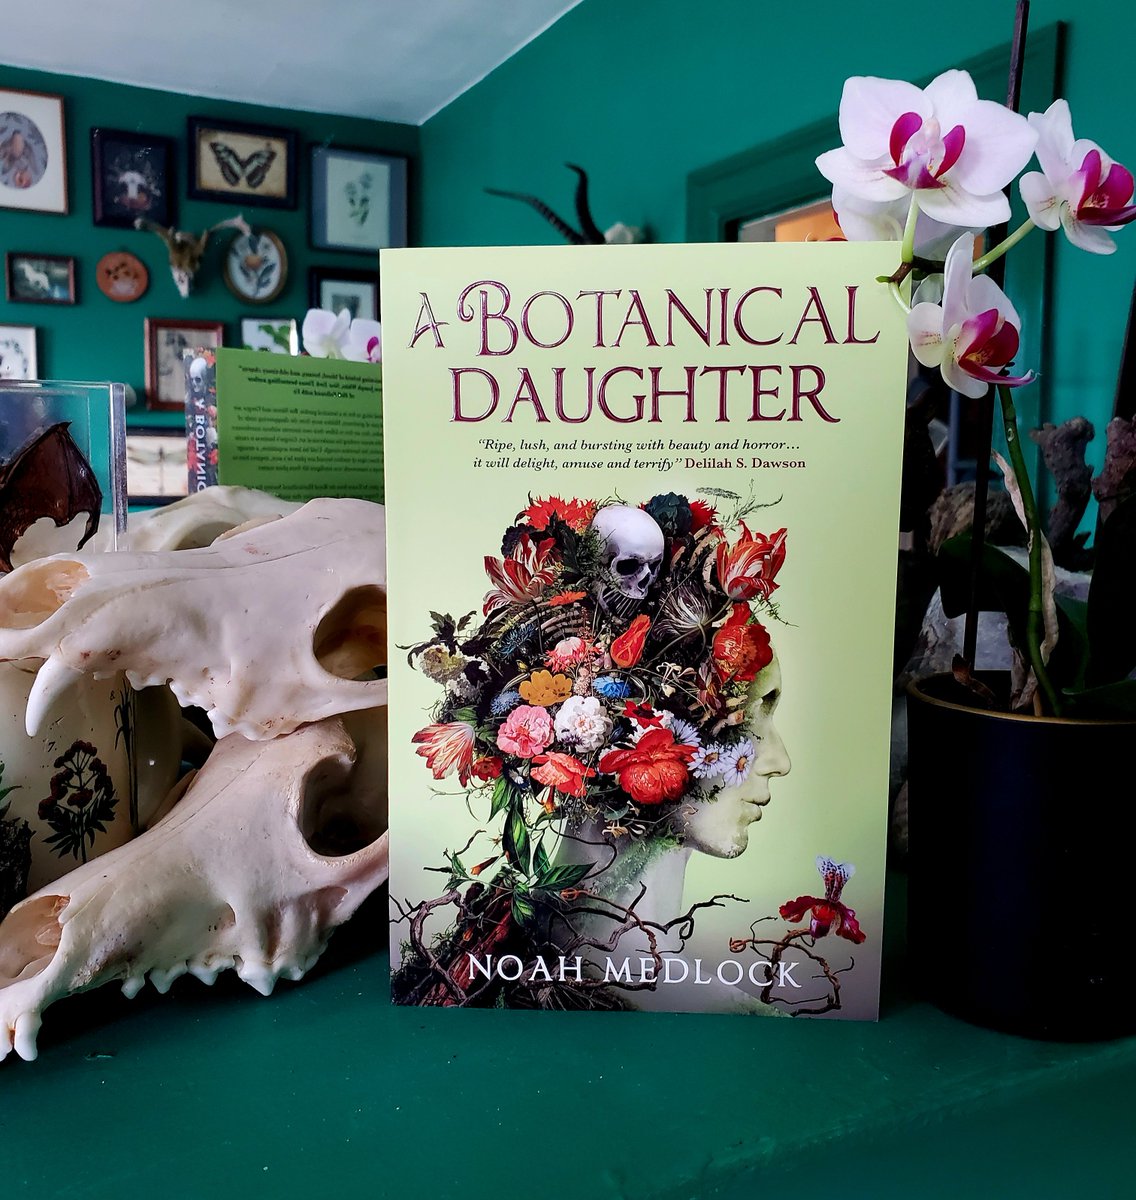 Just got my copy of A Botanical Daughter, which I pre-ordered ages ago, in the mail! I'm so excited to start reading. I know I'm not on Twitter much anymore, but I've been following @medlock_noah and this book's journey for years. Here's to some queer Victorian gothic goodness!